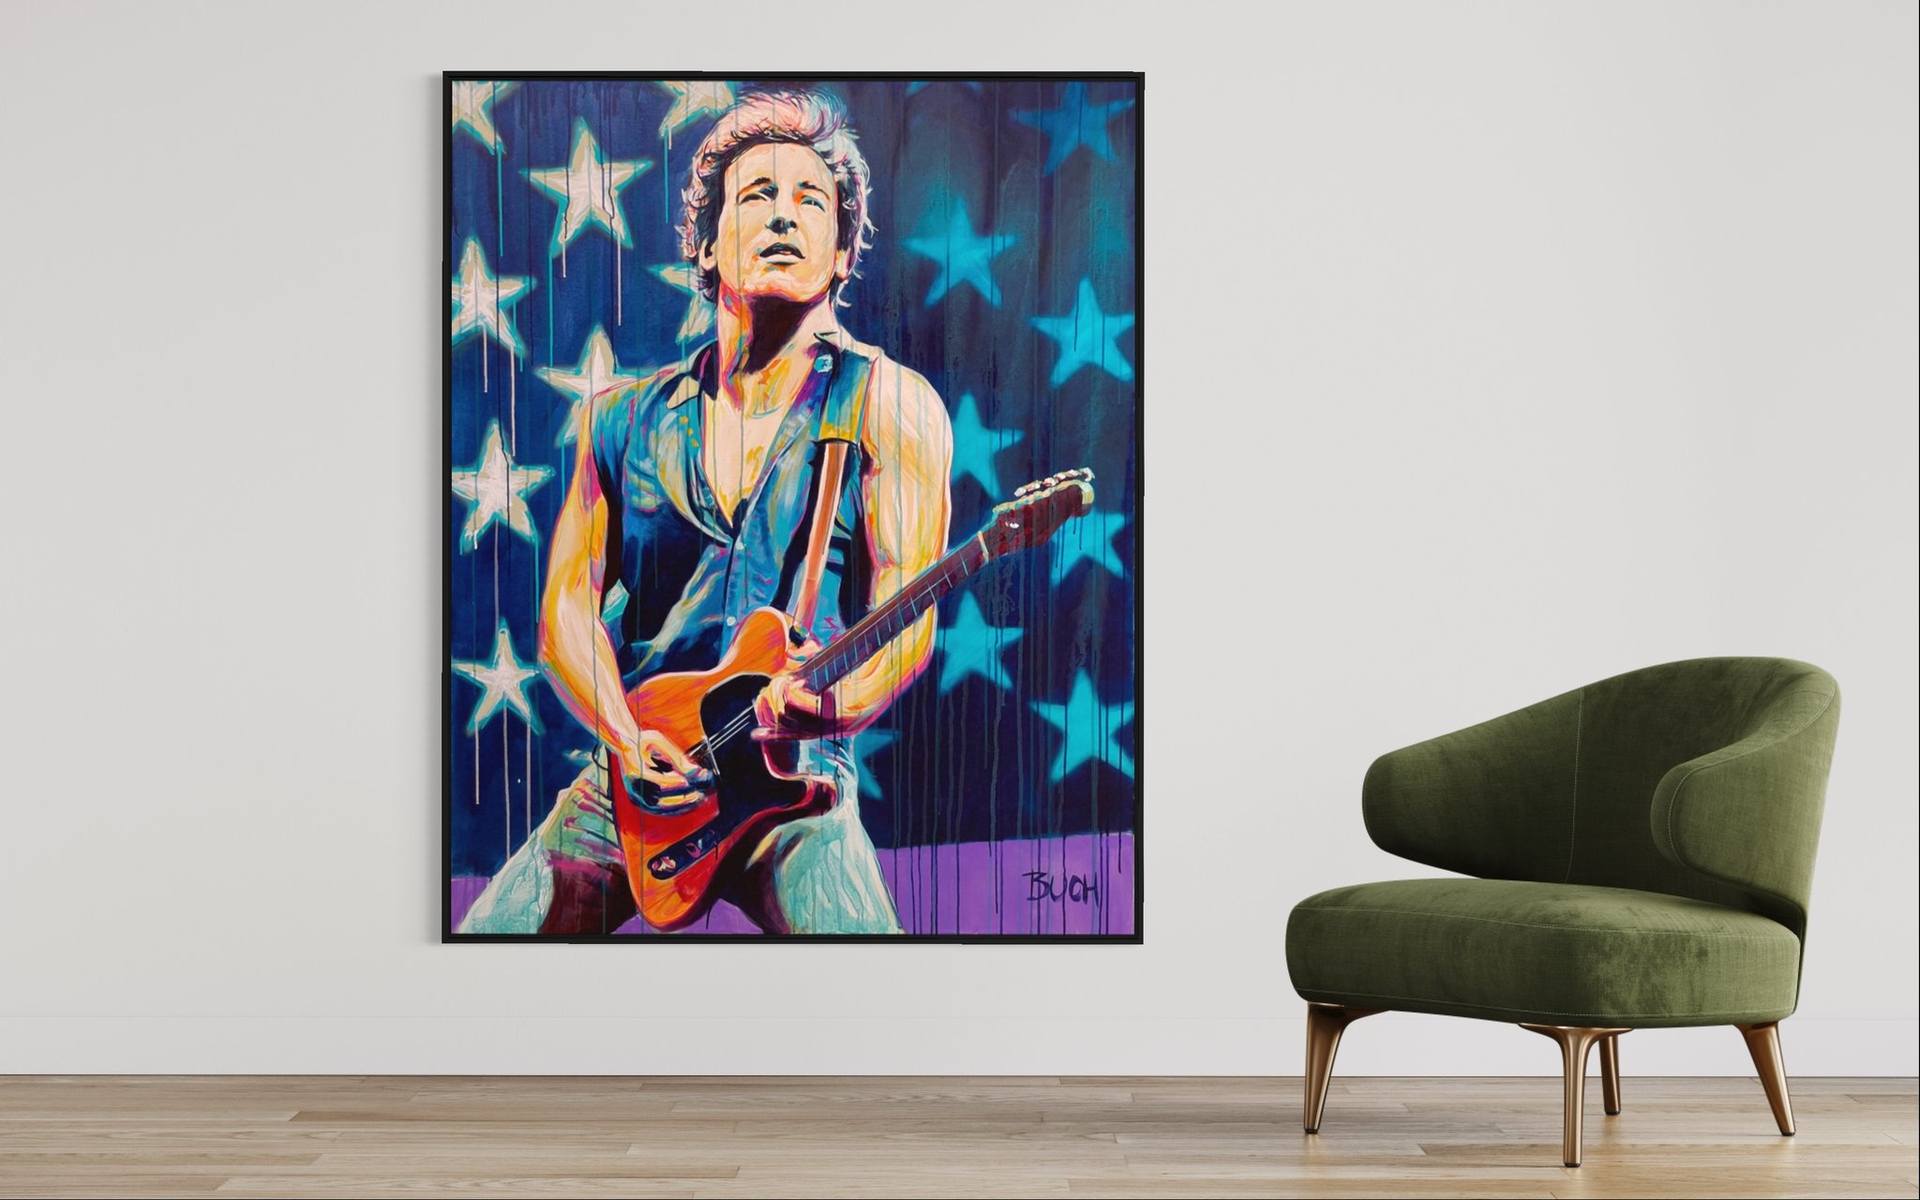 Bruce Springsteen Painting by Allan Buch | Saatchi Art